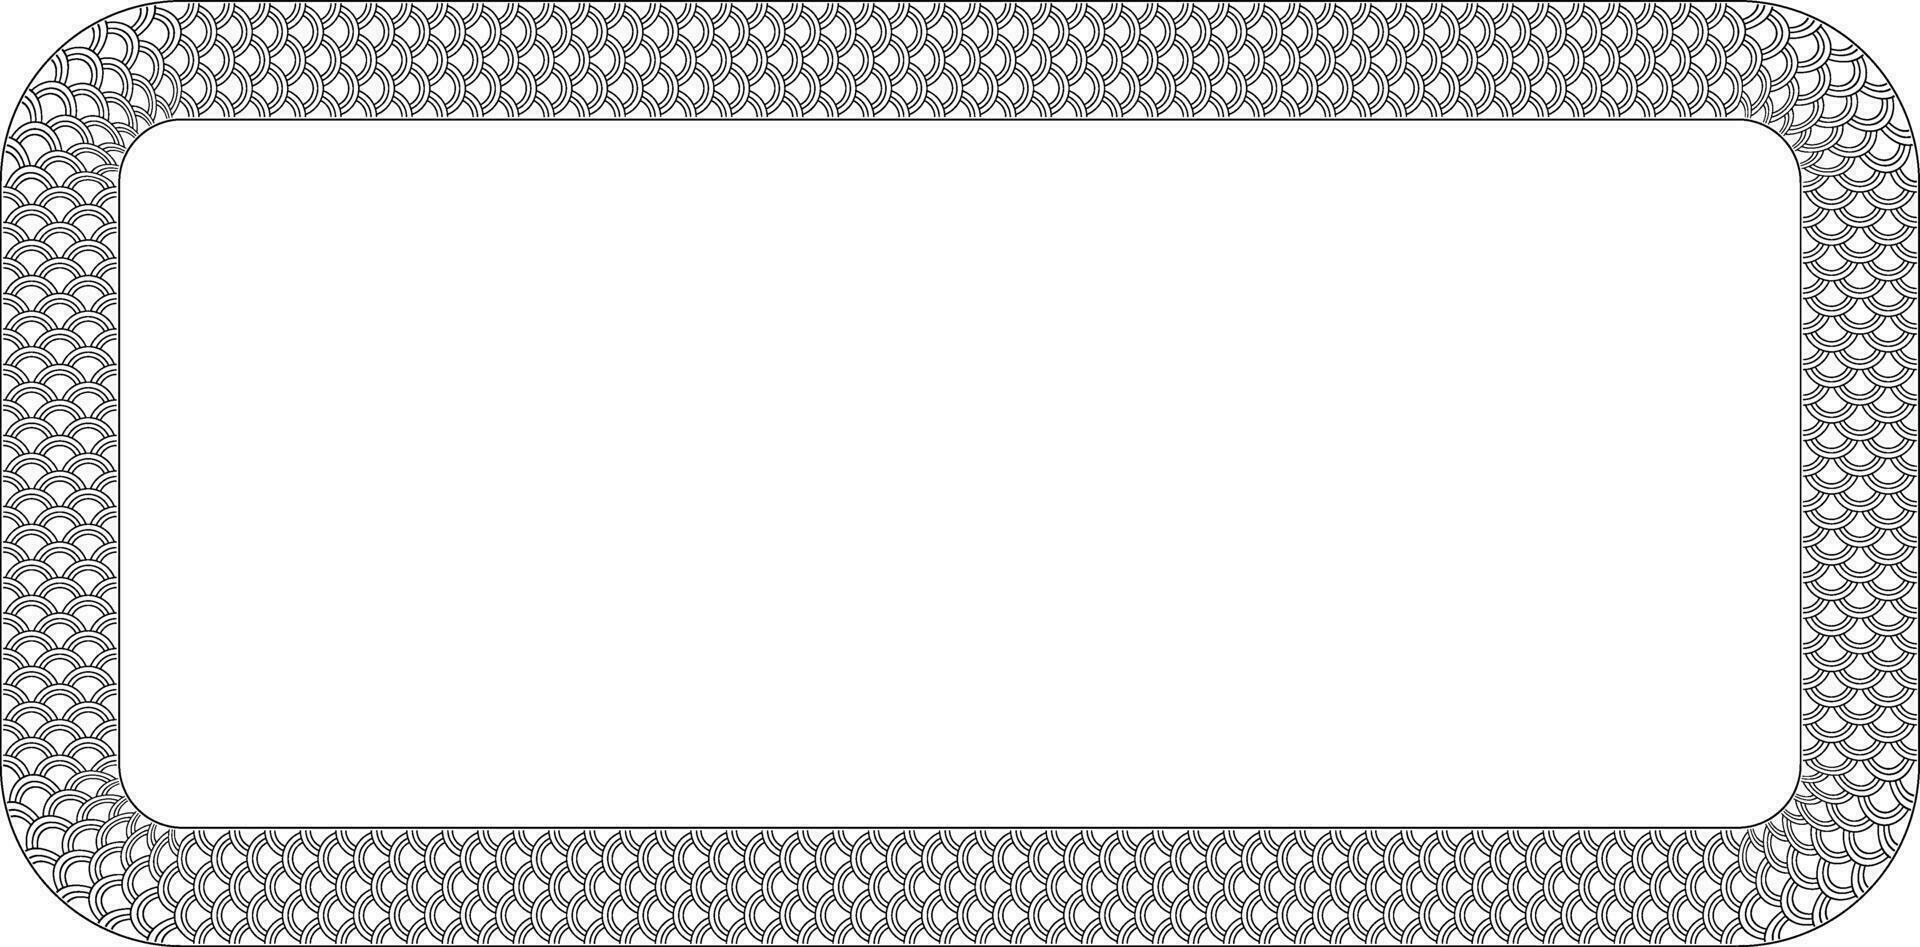 rectangular reptile scale frame with copy space vector